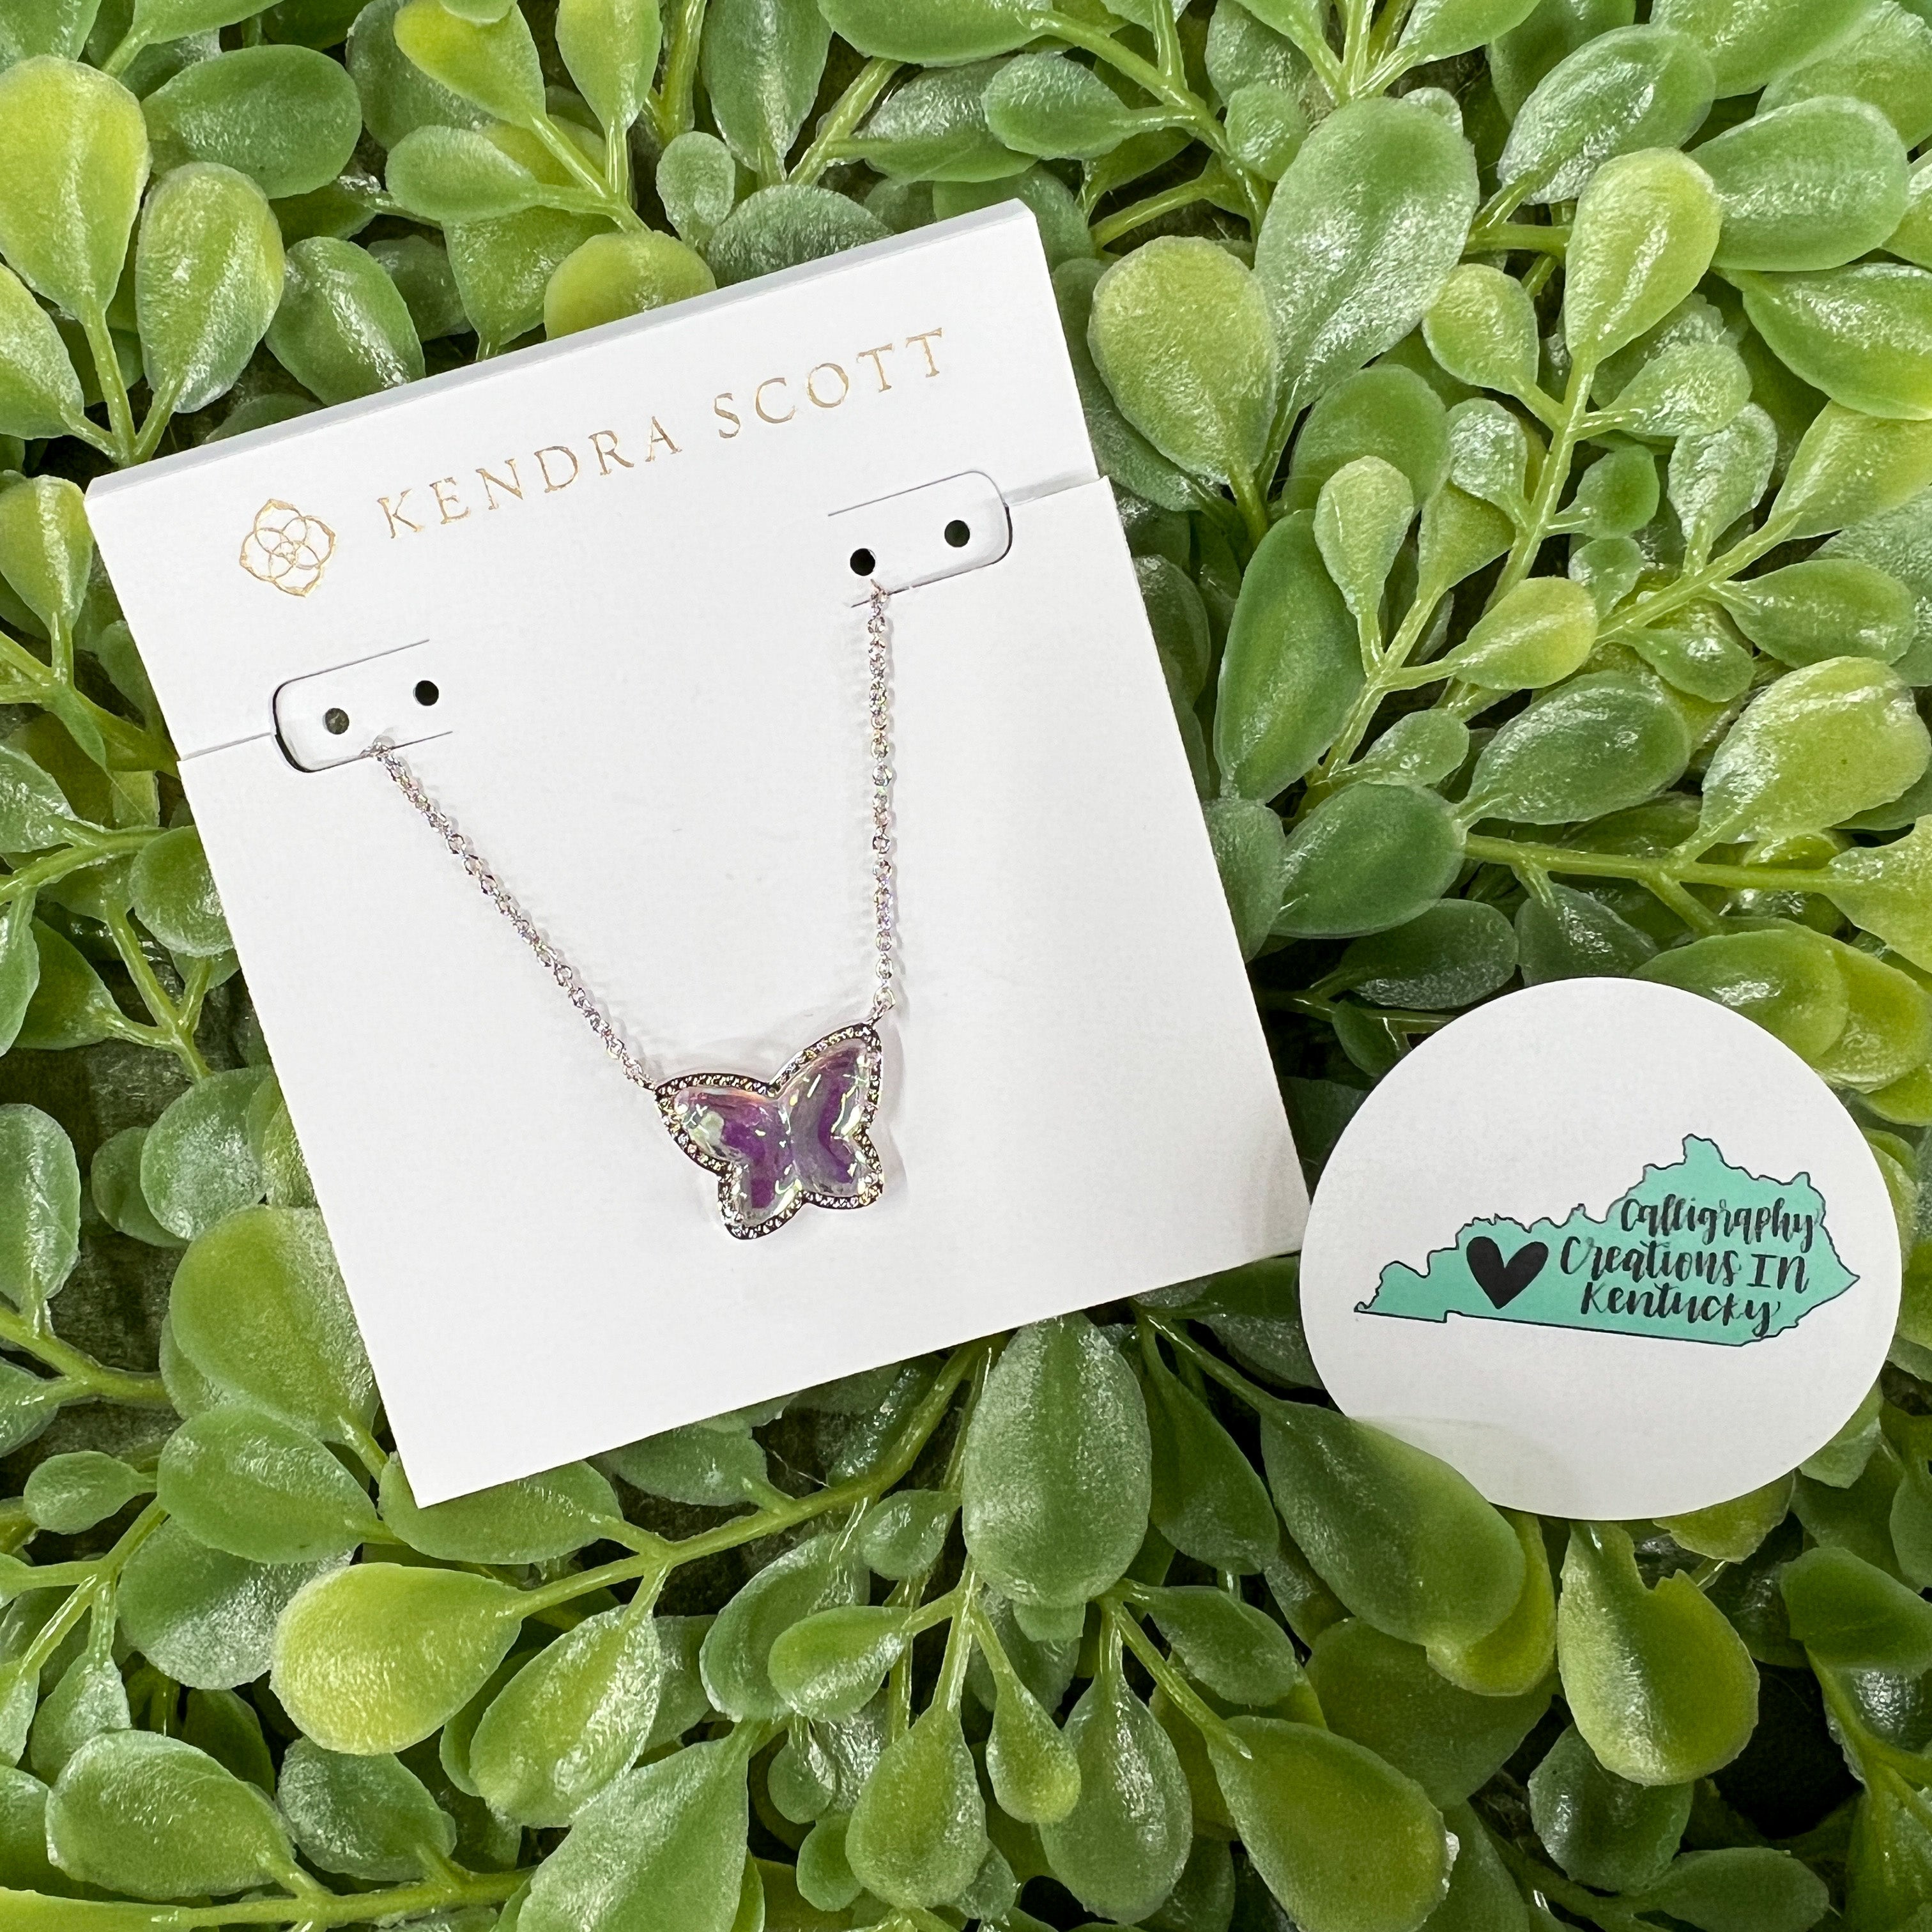 Lasting Impressions - The Lillia Butterfly Gold Pendant Necklace in  Dichroic Glass is the perfect pop of color to your next layered look🦋  #shoplastingimpressions #shoplocal #kendrascott #jewelry #birthdaygiftideas  #mothersdaygift #butterflynecklace ...